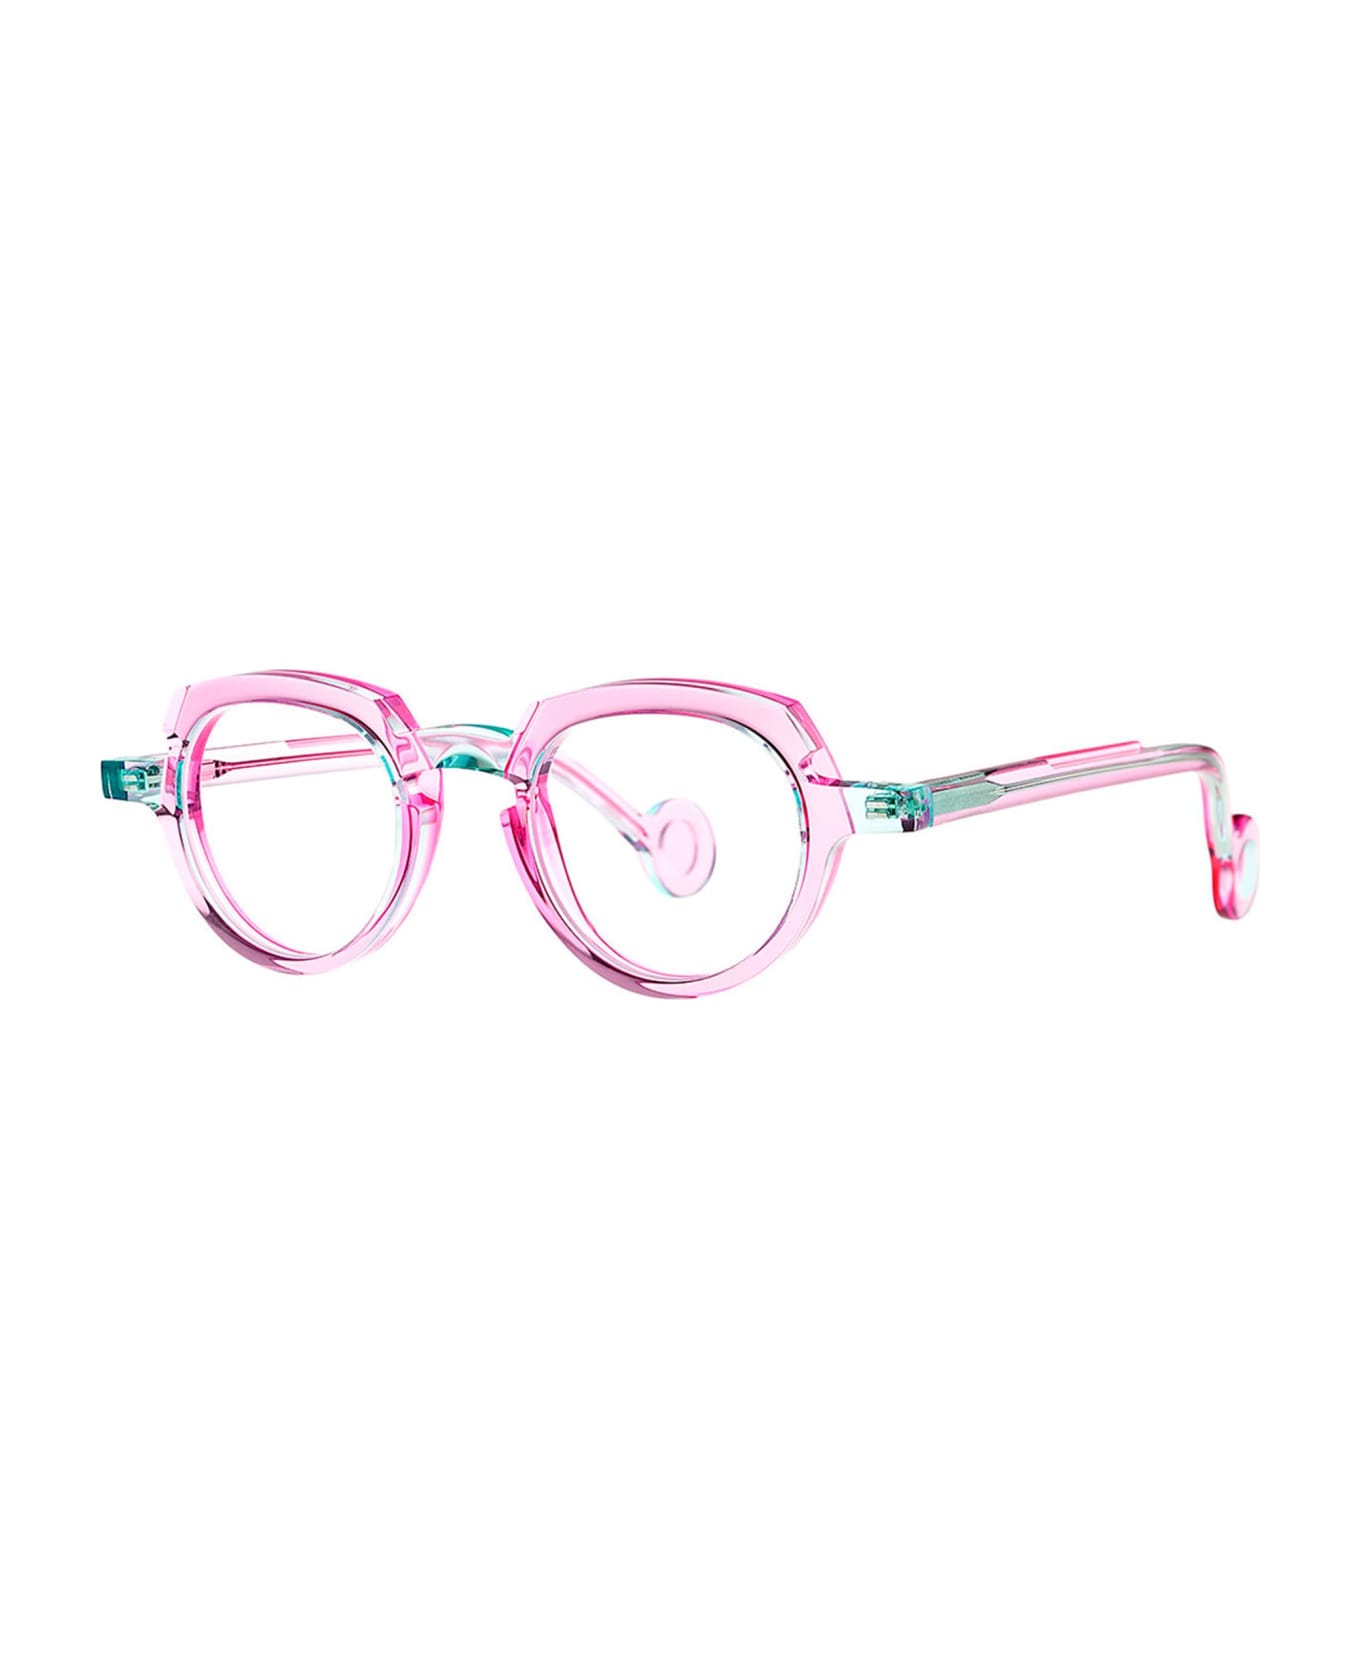 Theo Eyewear Andy - 011 Rx Glasses - pink